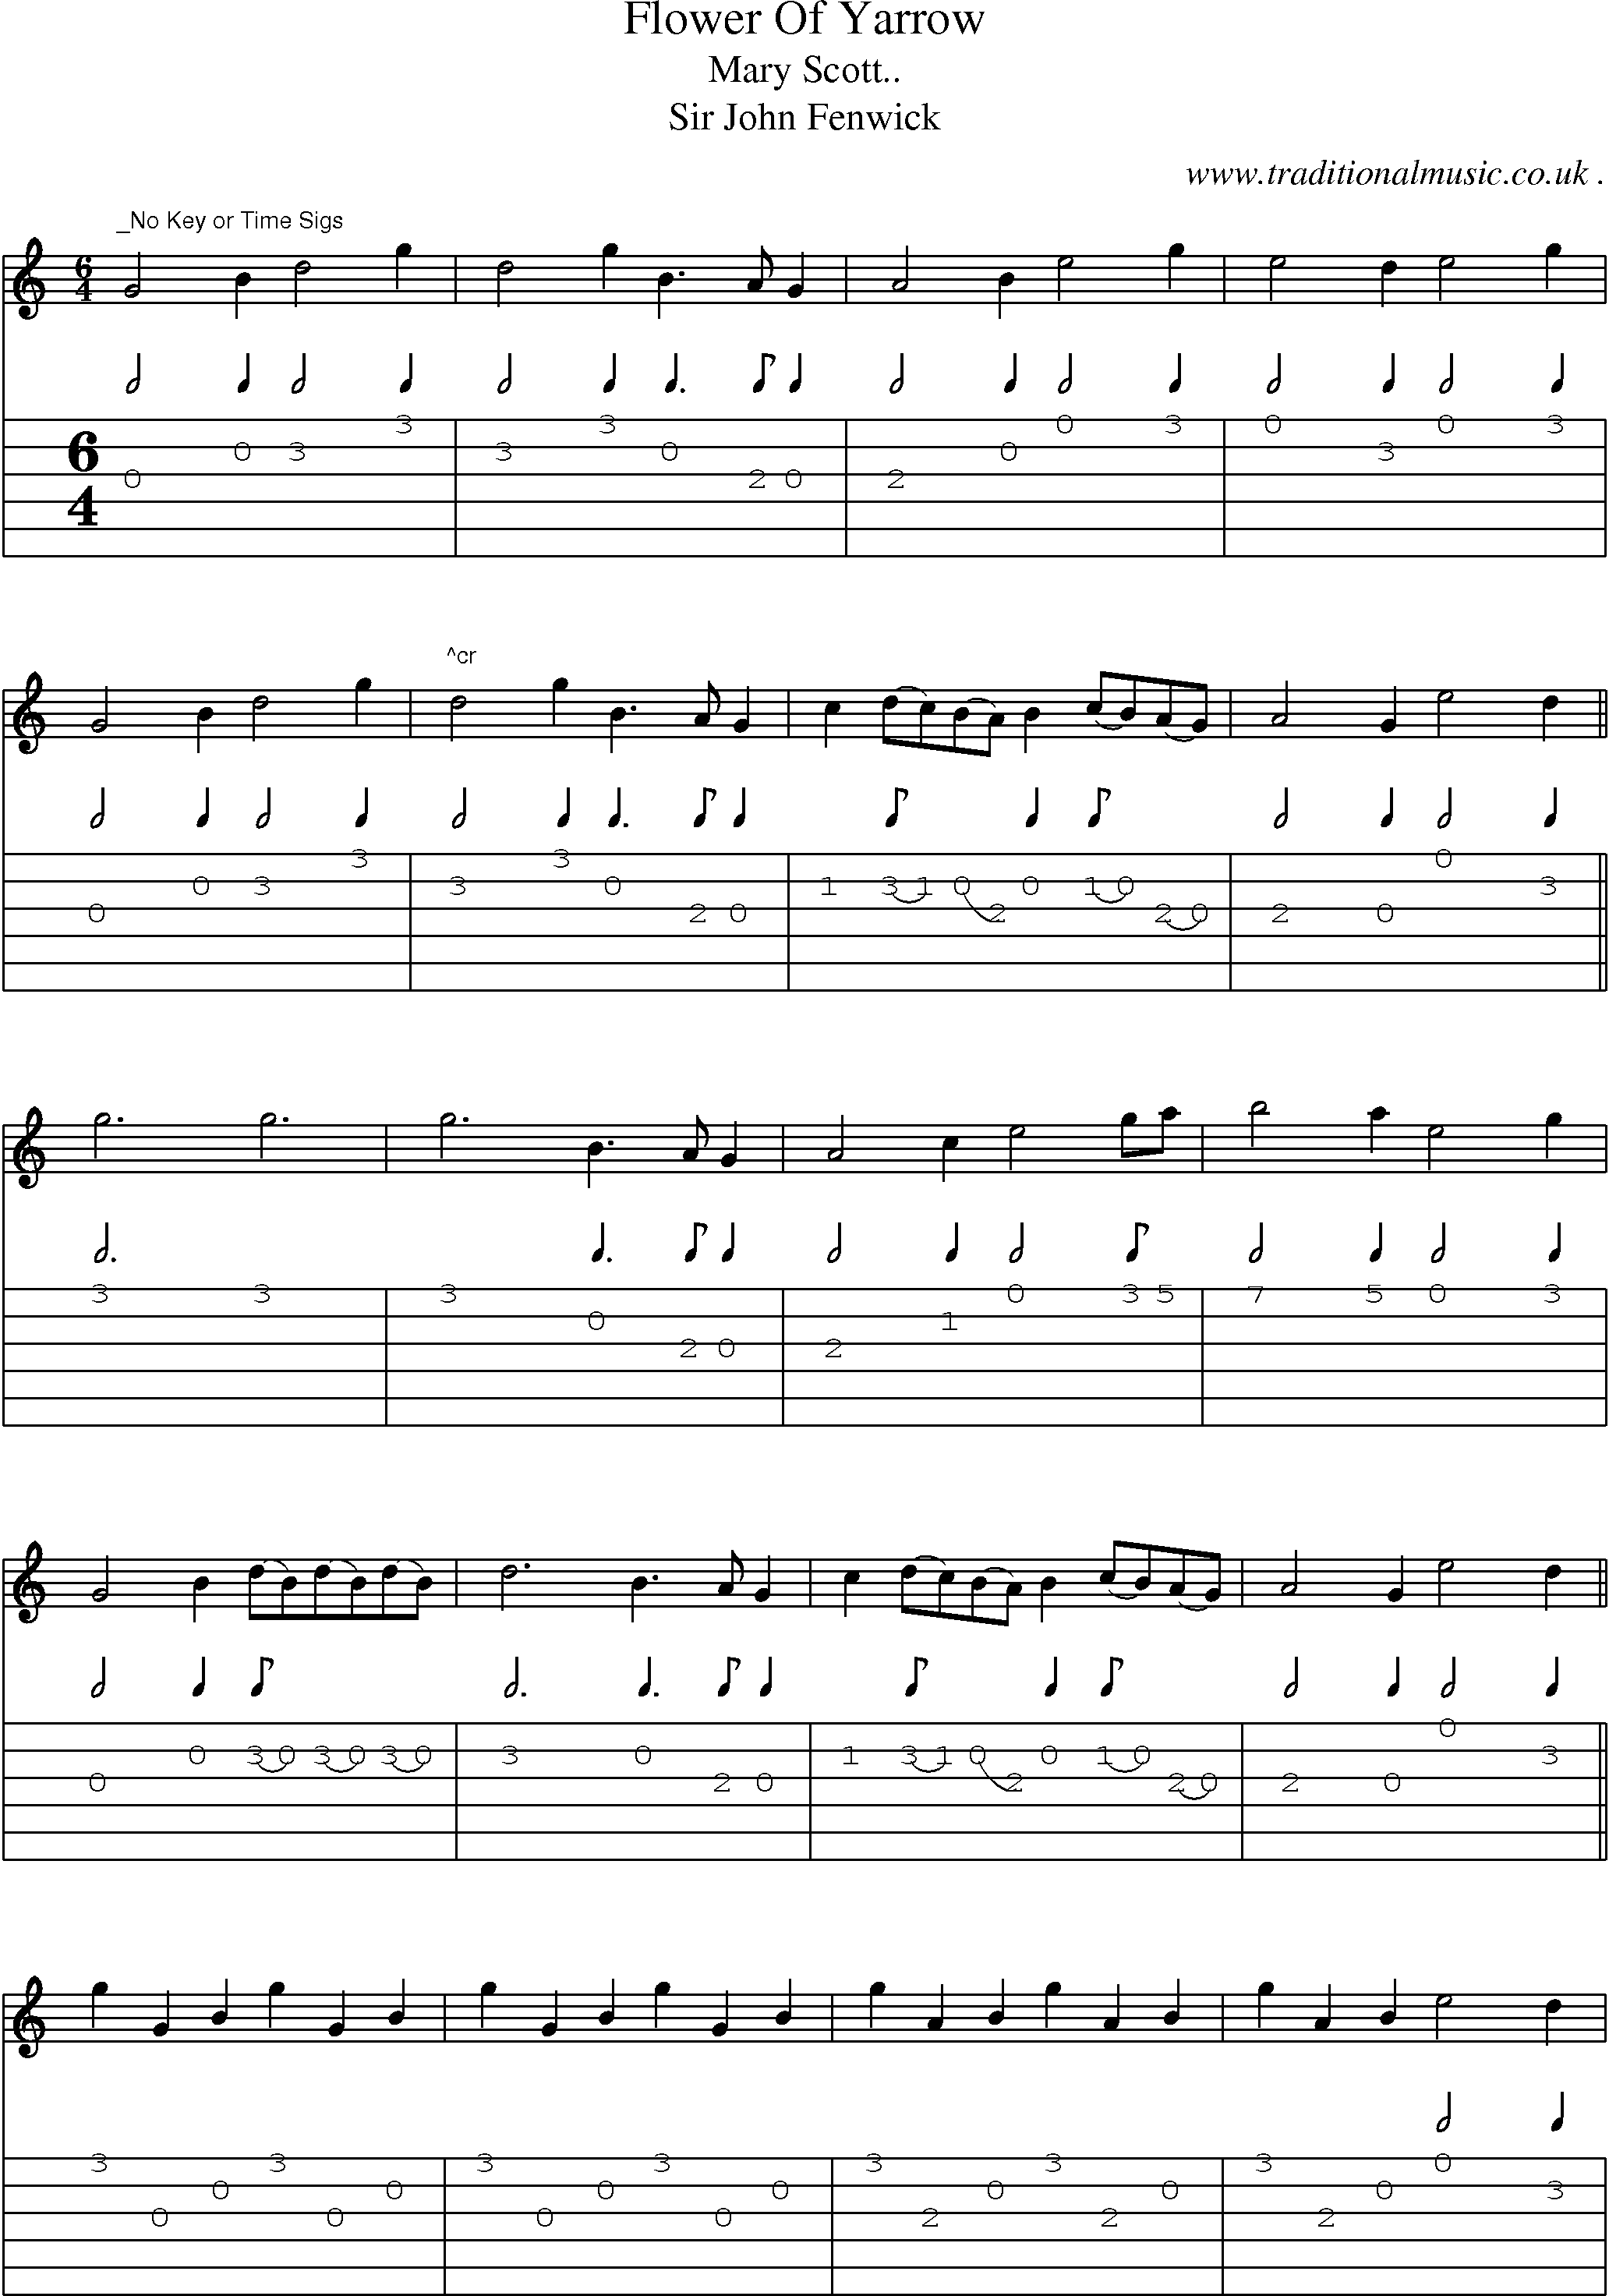 Sheet-Music and Guitar Tabs for Flower Of Yarrow